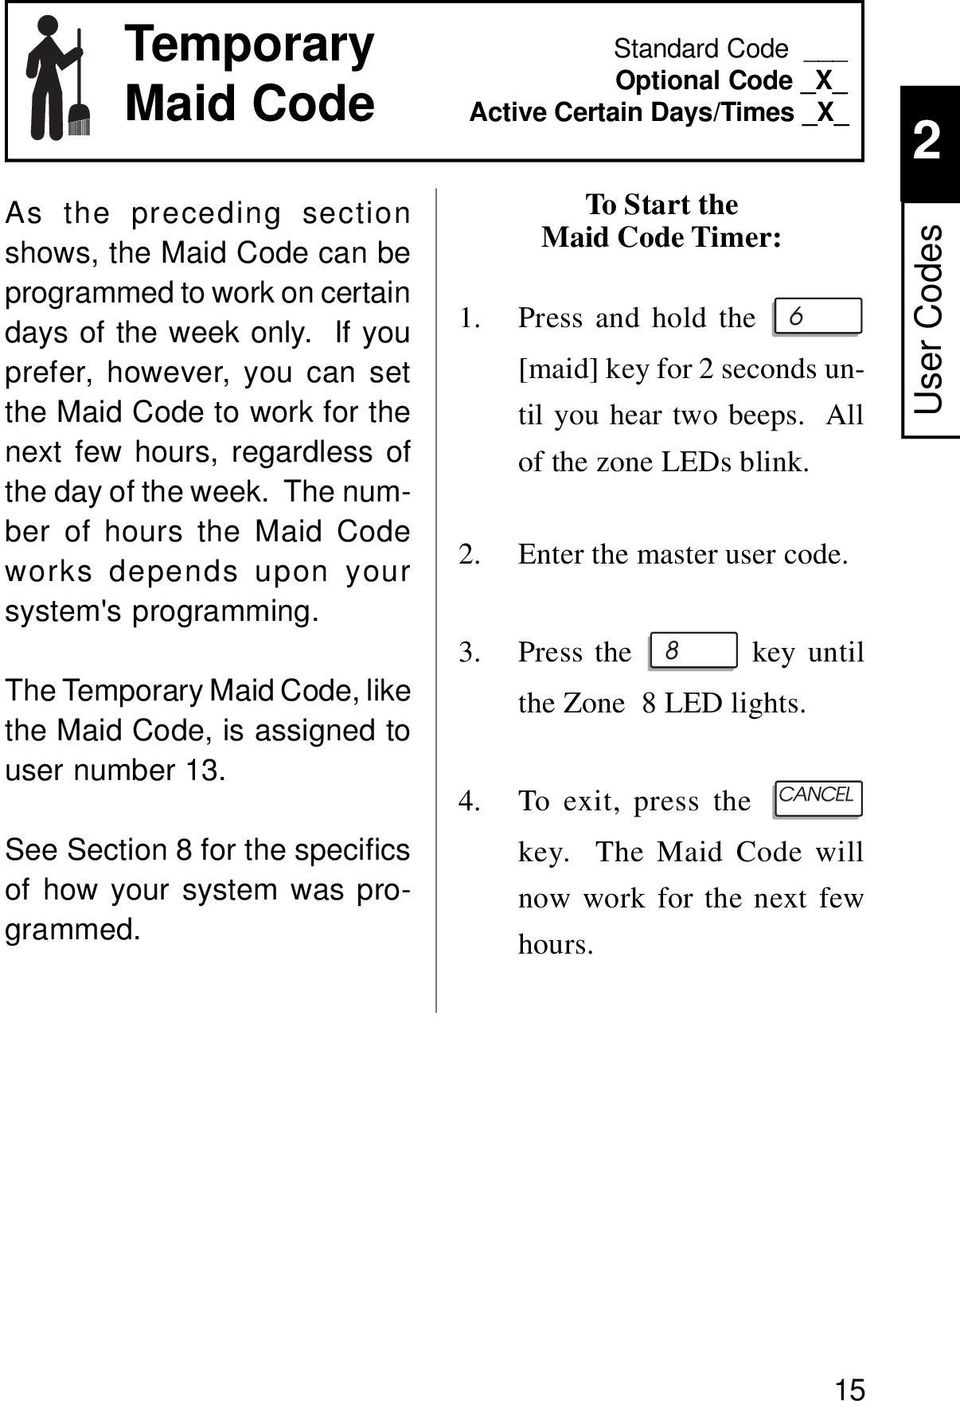 The Temporary Maid Code, like the Maid Code, is assigned to user number 13. See Section 8 for the specifics of how your system was programmed.